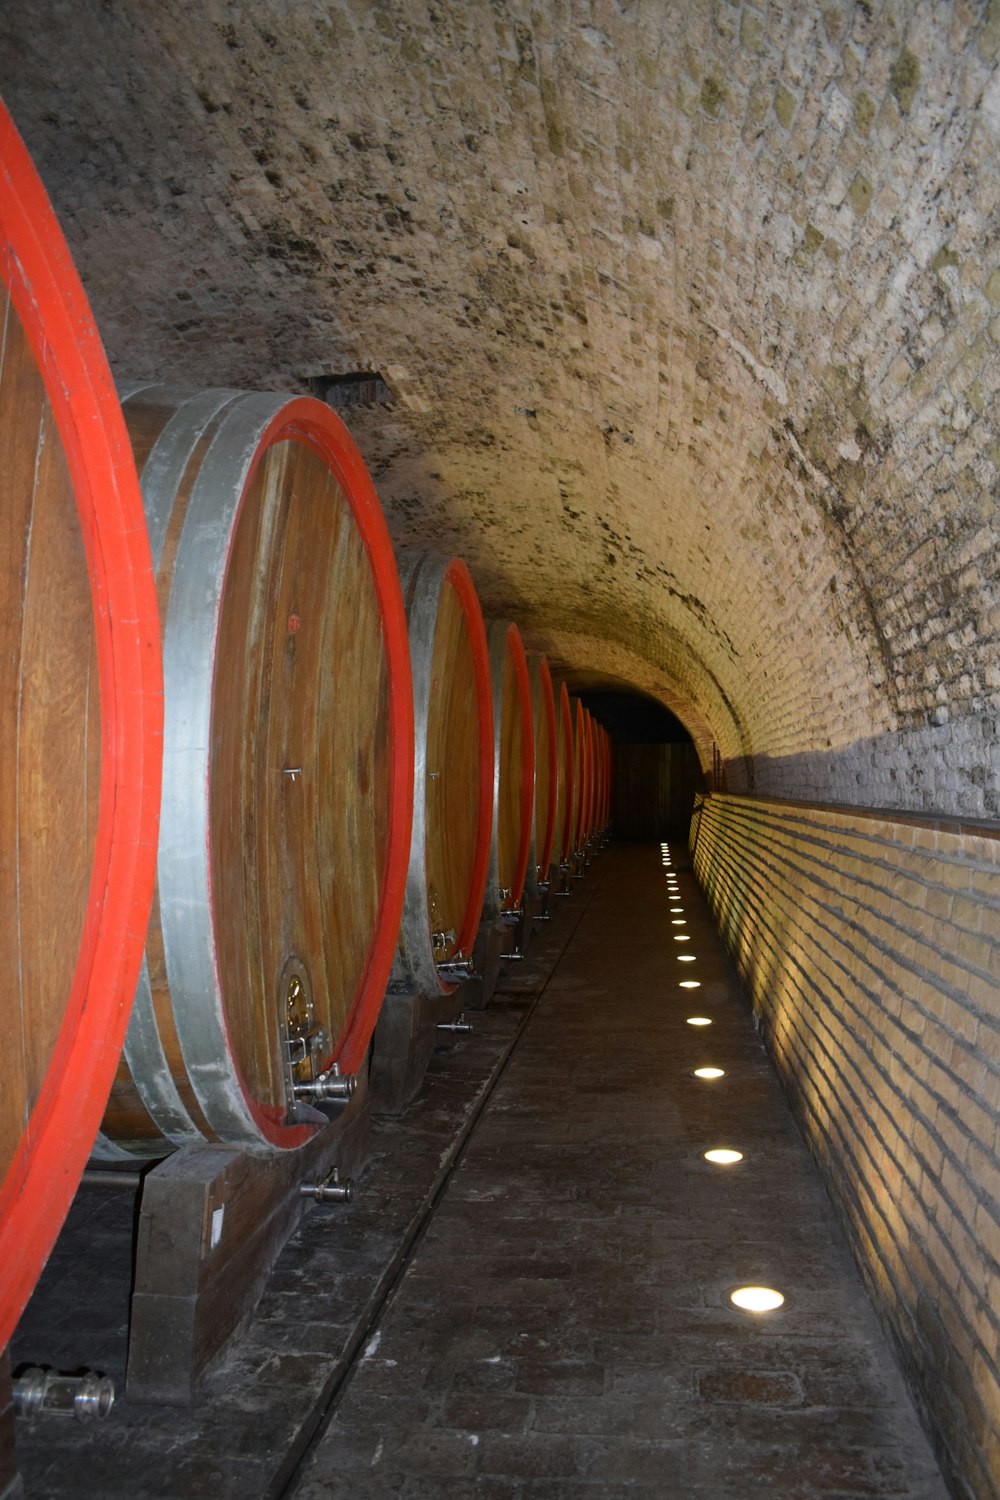 a tunnel with several wine barrels in it